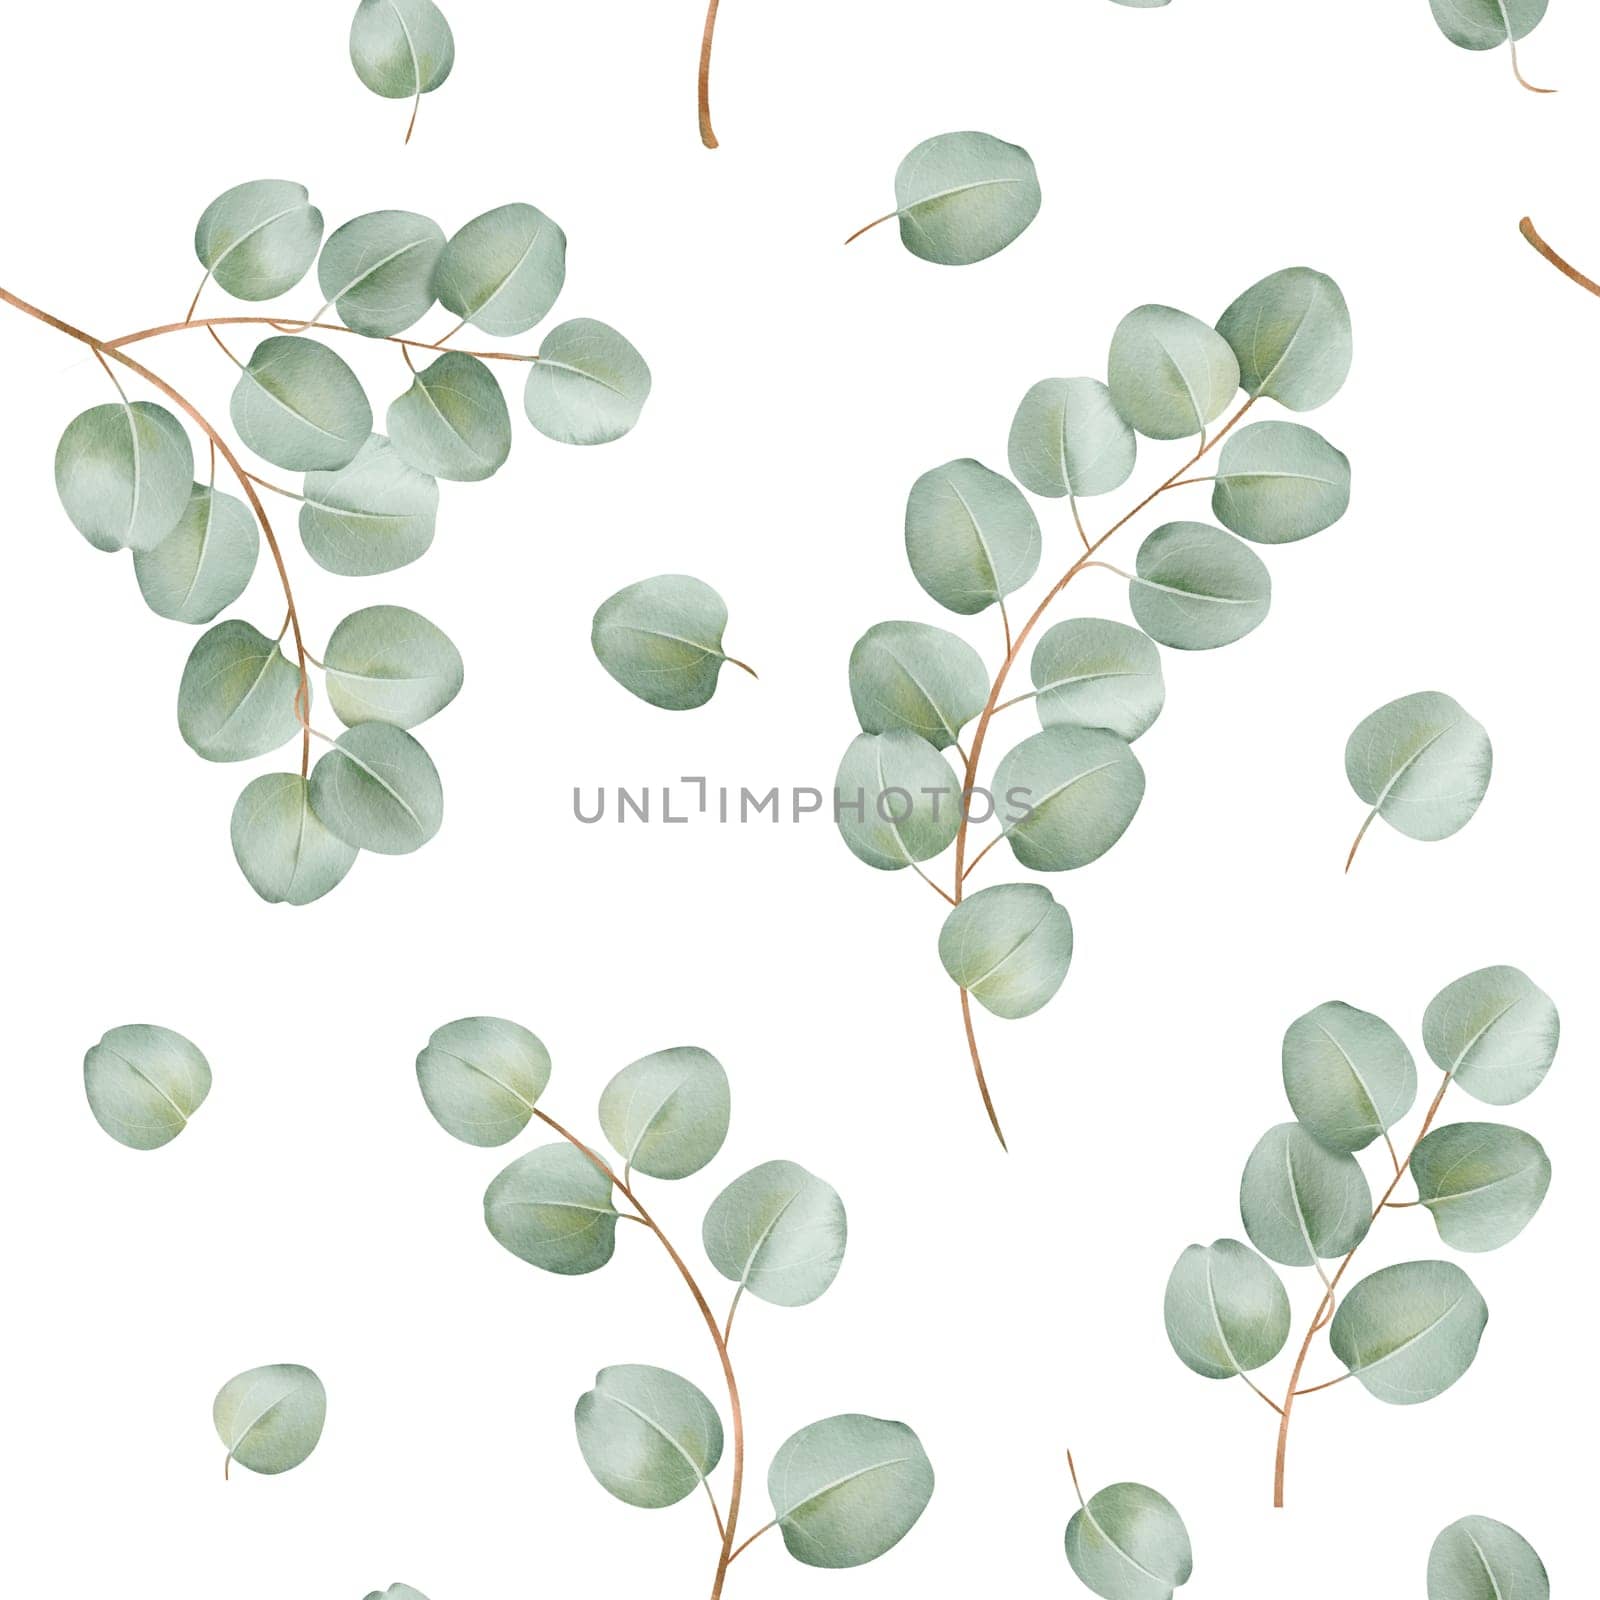 Seamless pattern watercolor eucalyptus branches. for wallpaper, fabric design, stationery, packaging for bringing natural charm and depth to creative project.